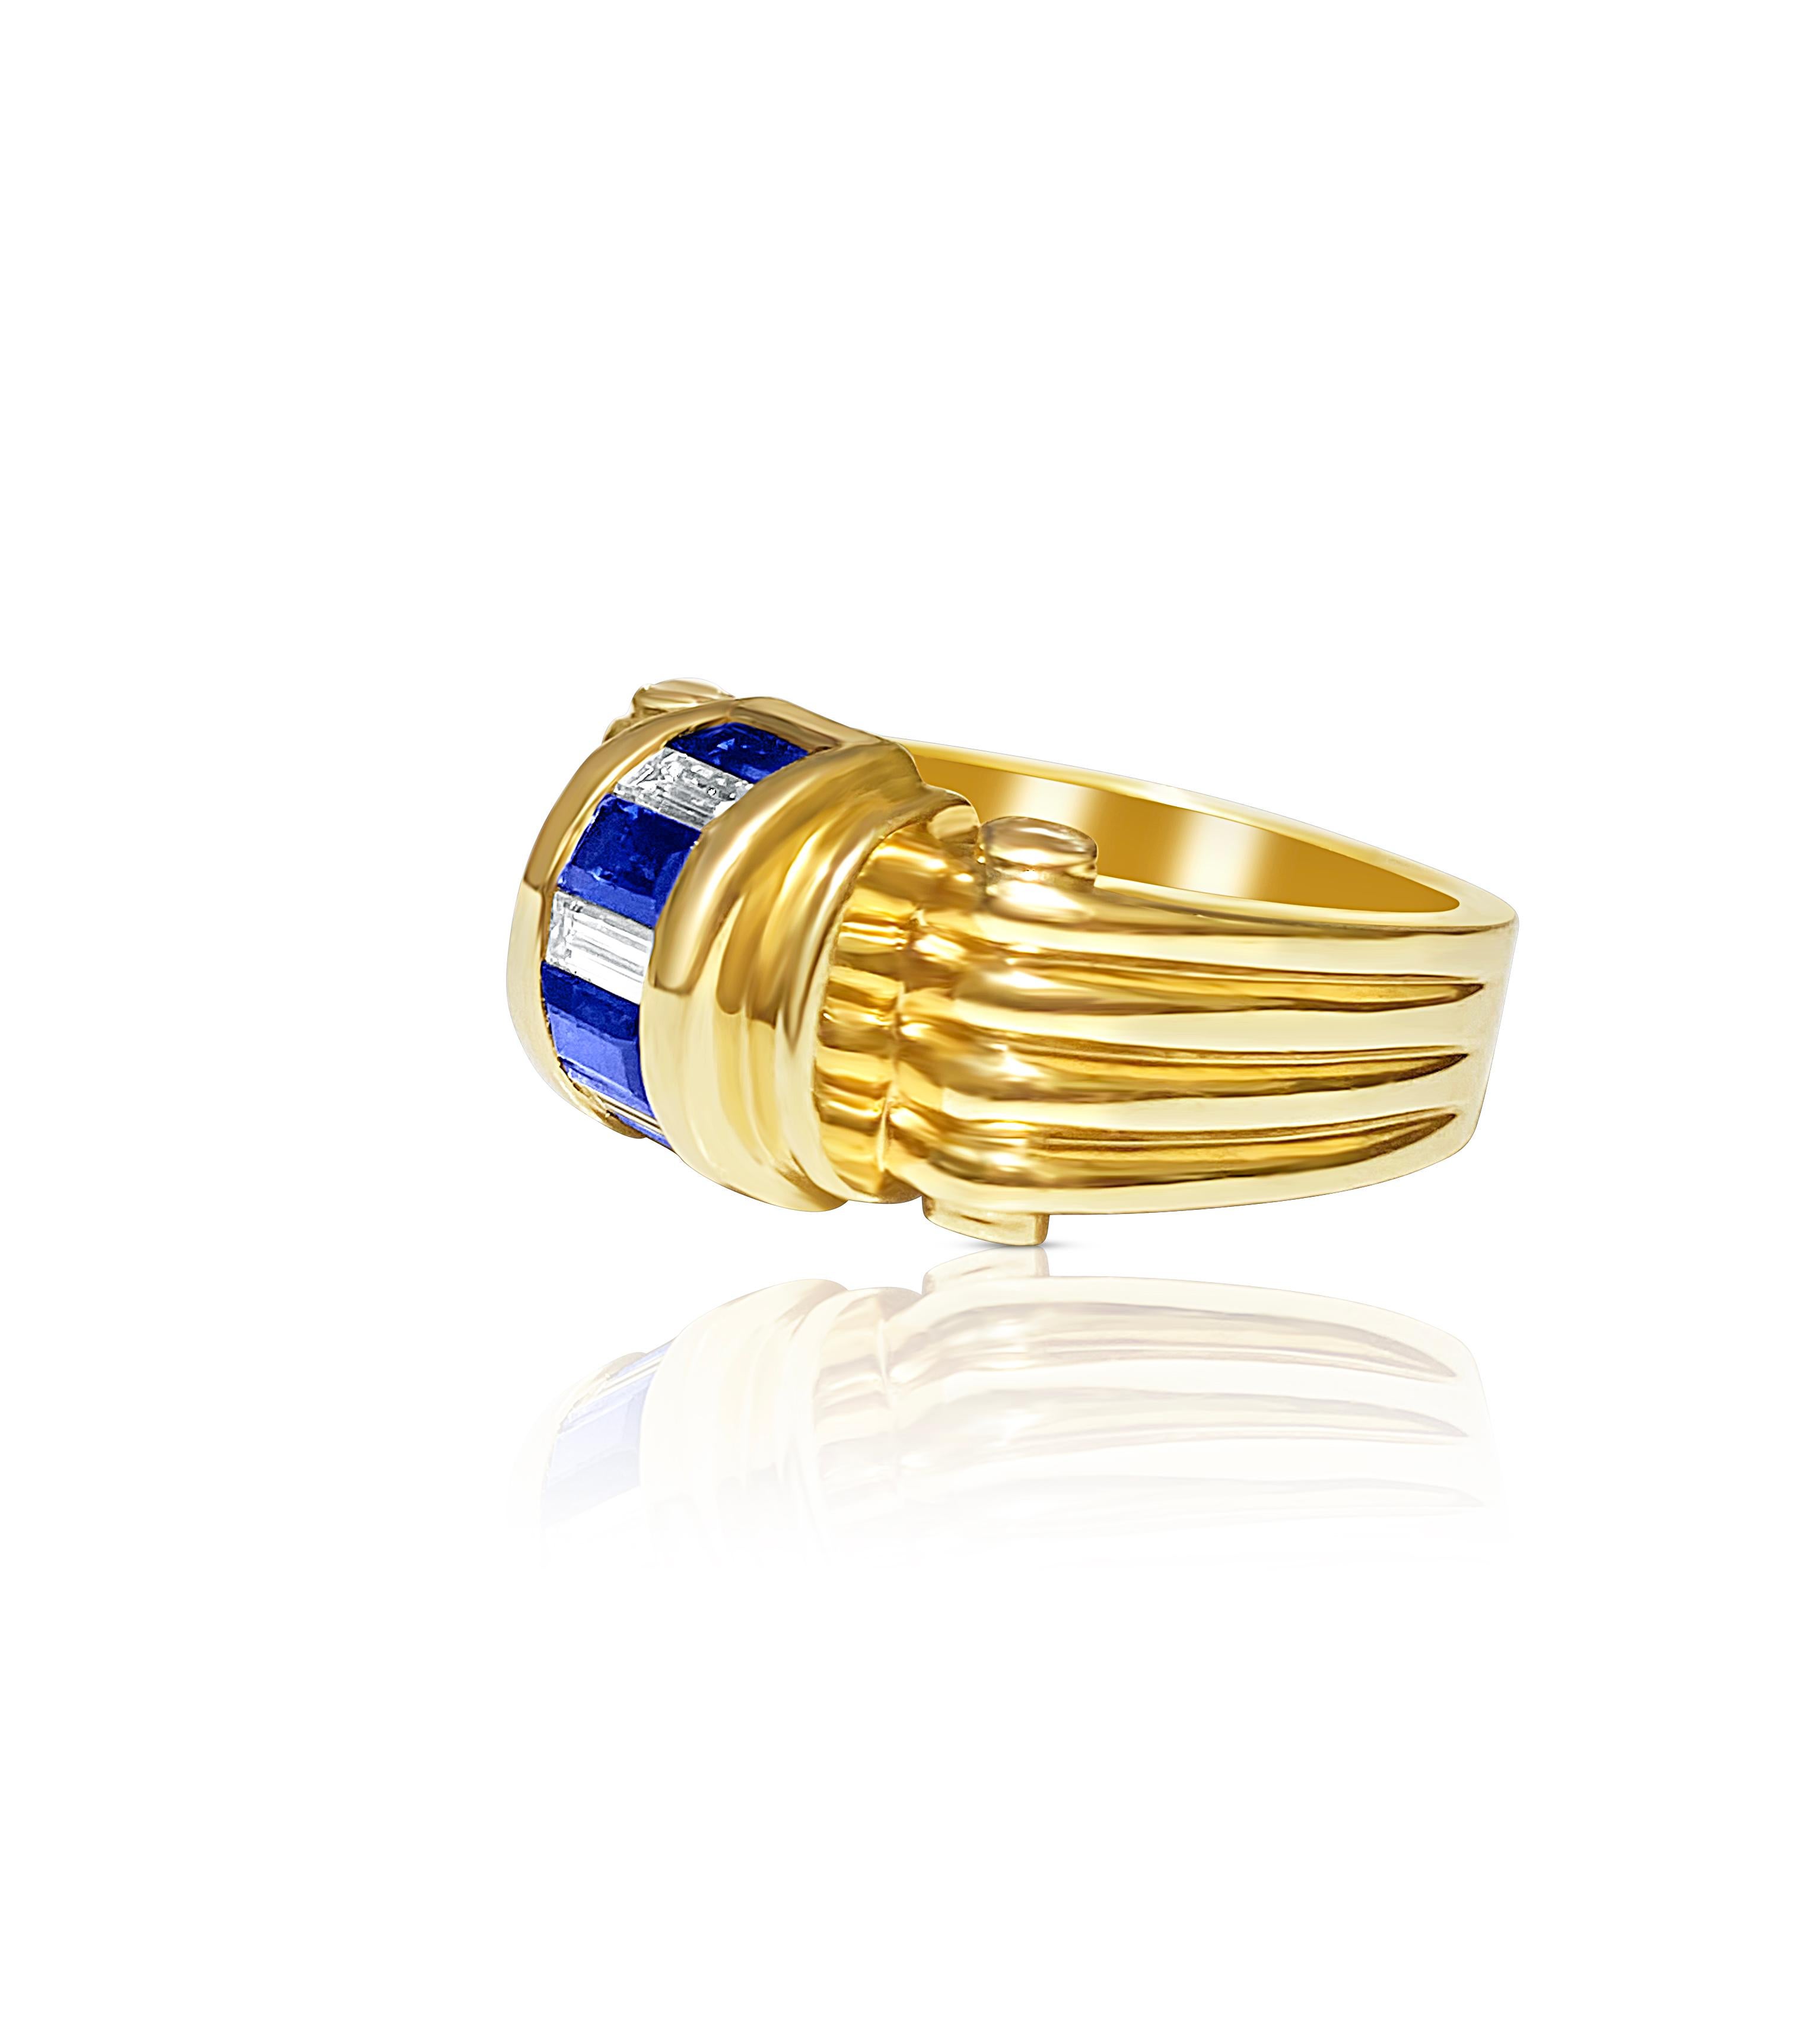 Vintage natural baguette-cut diamond and blue sapphire ring. The ring is made in textured 18k solid gold and has a perfectly contrasting color pattern of blue Sapphire's and white Diamond's. This ring has the aesthetic versatility to be worn by both